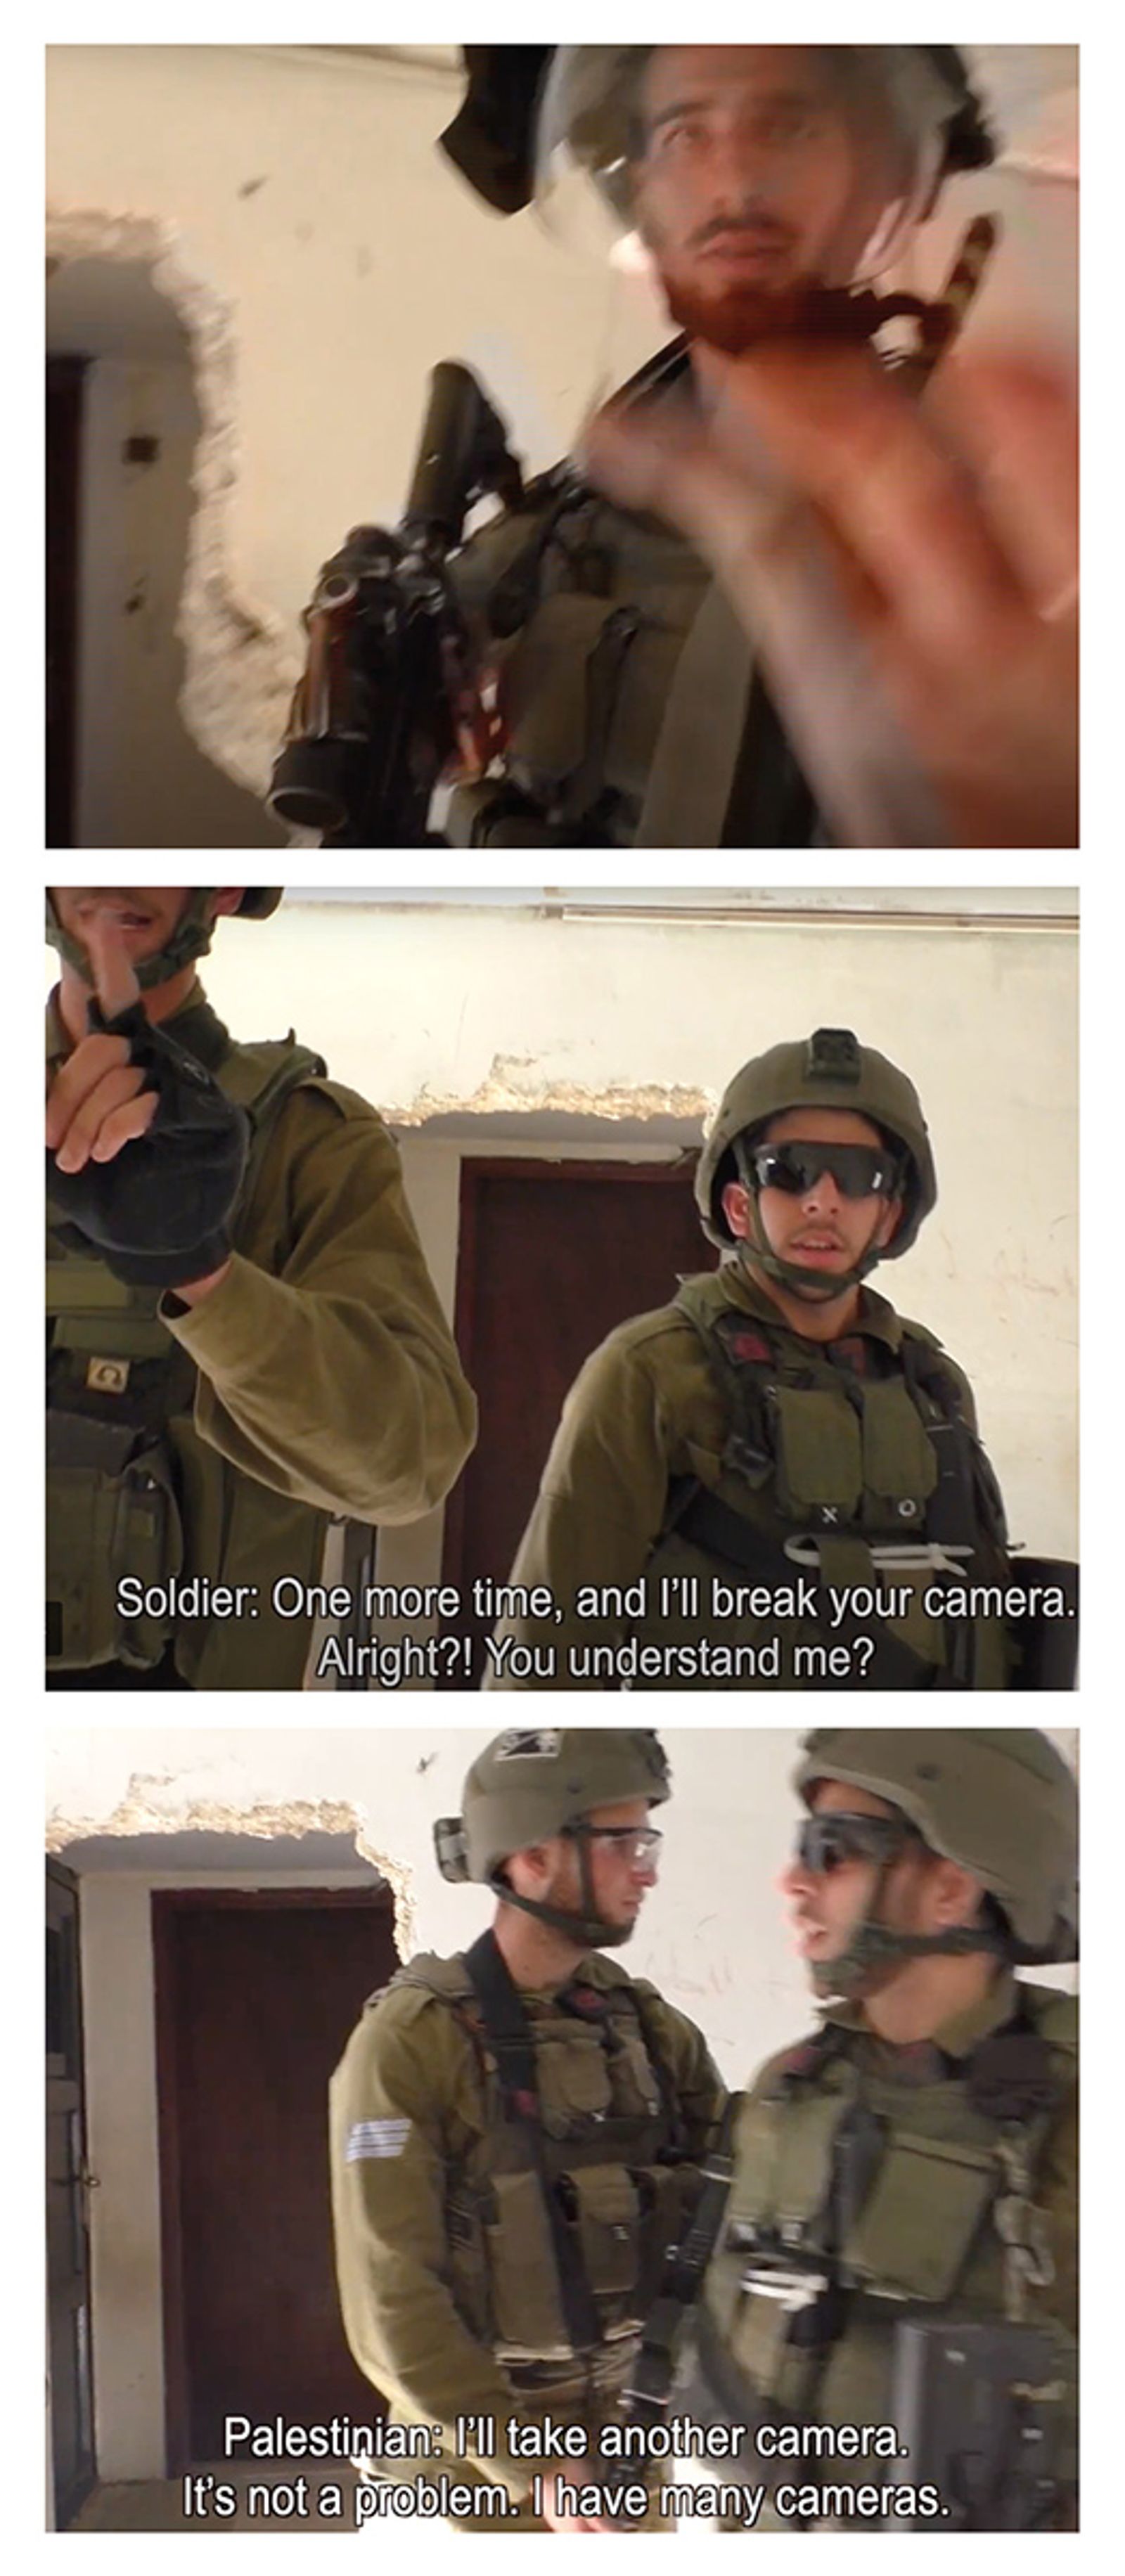 © Edith Geuppert - from a video by the Human Rights Organisation B’Tselem in Hebron